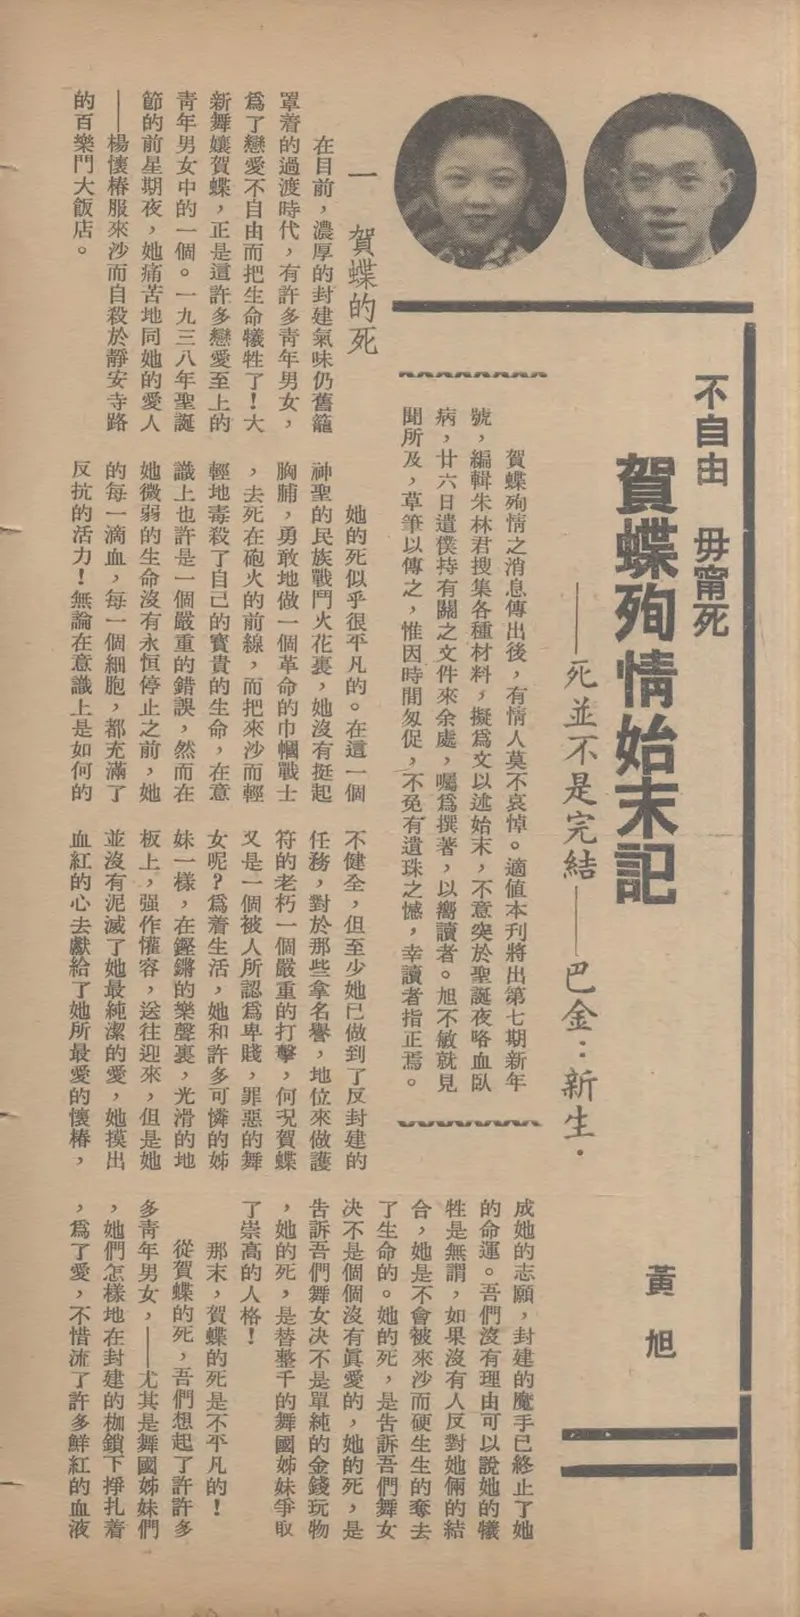 An article from the 7th issue《舞影》not only recounting the story of He Die’s death, but also her love letter to Yang Huaichun (1939)